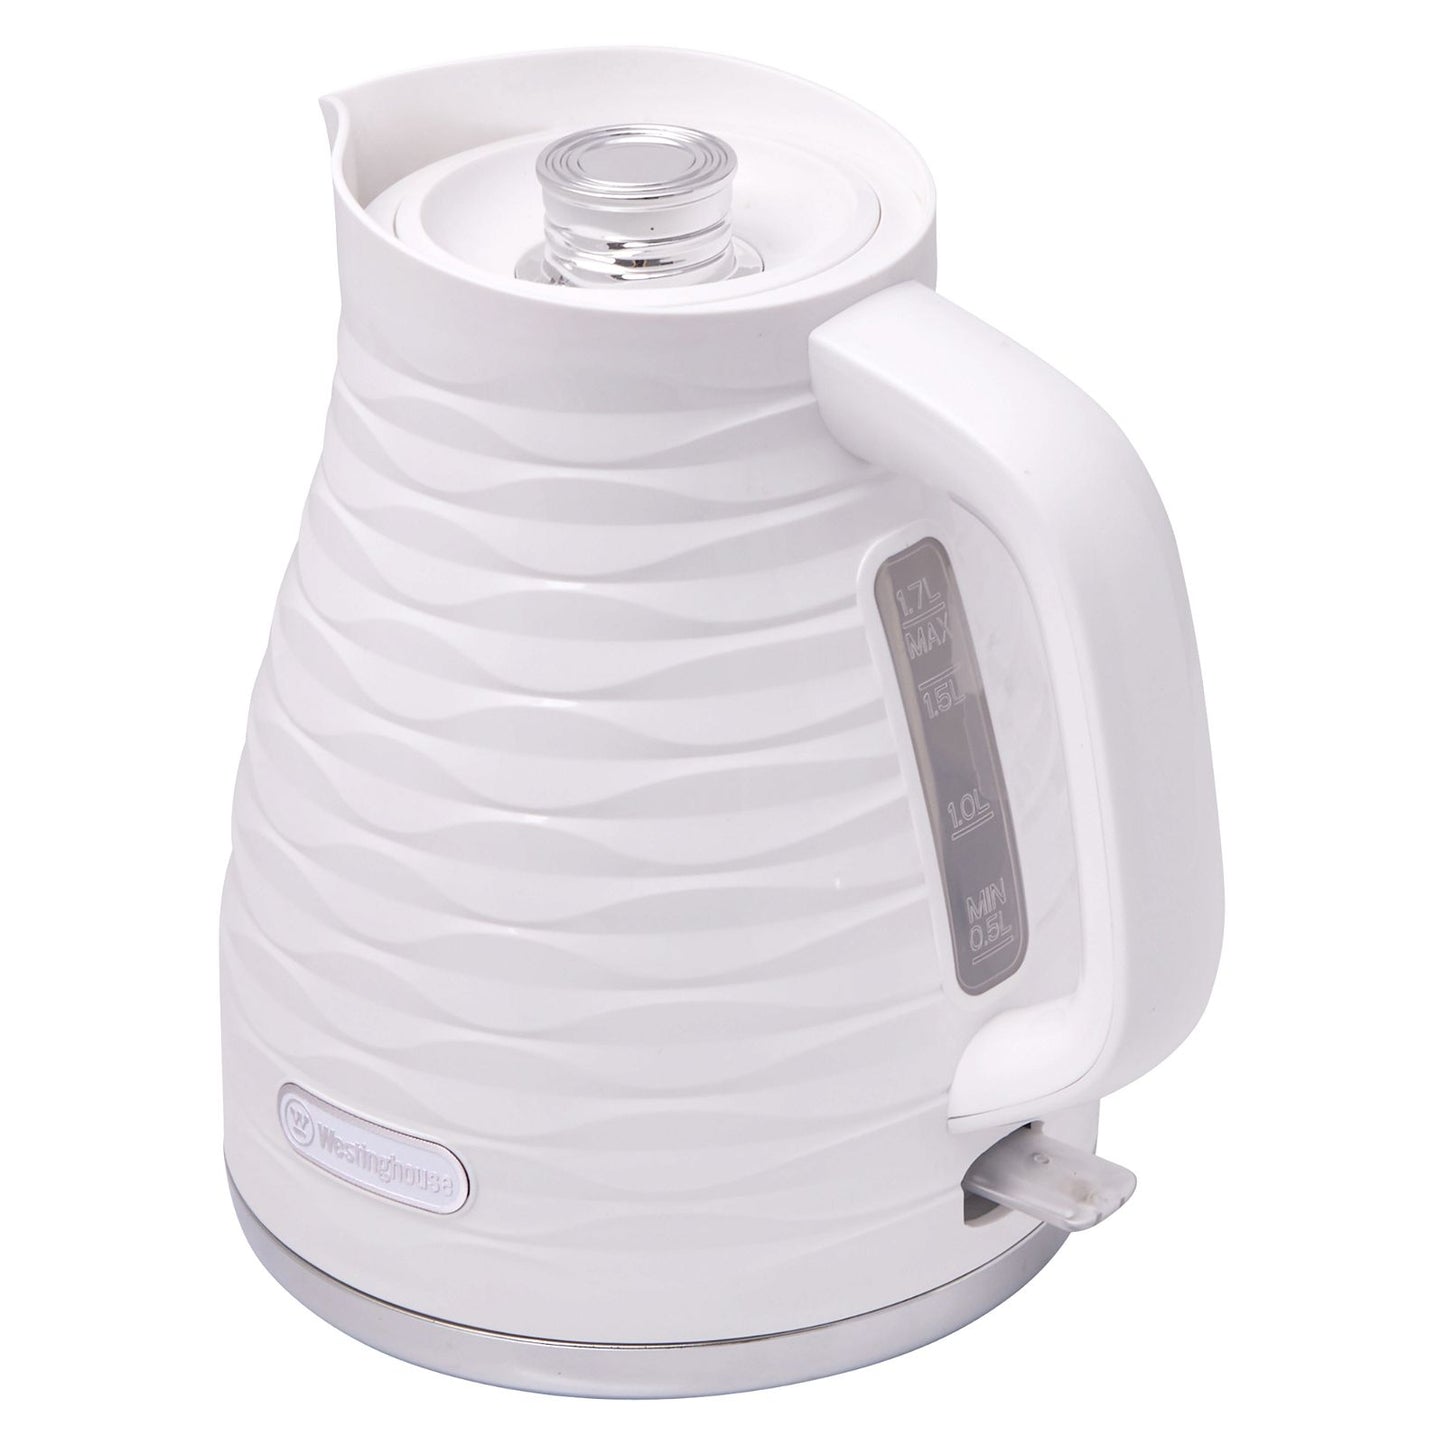 Westinghouse Kettle and Toaster Pack White Silver 1.7L Kettle, 4 Slice Toaster -  -  